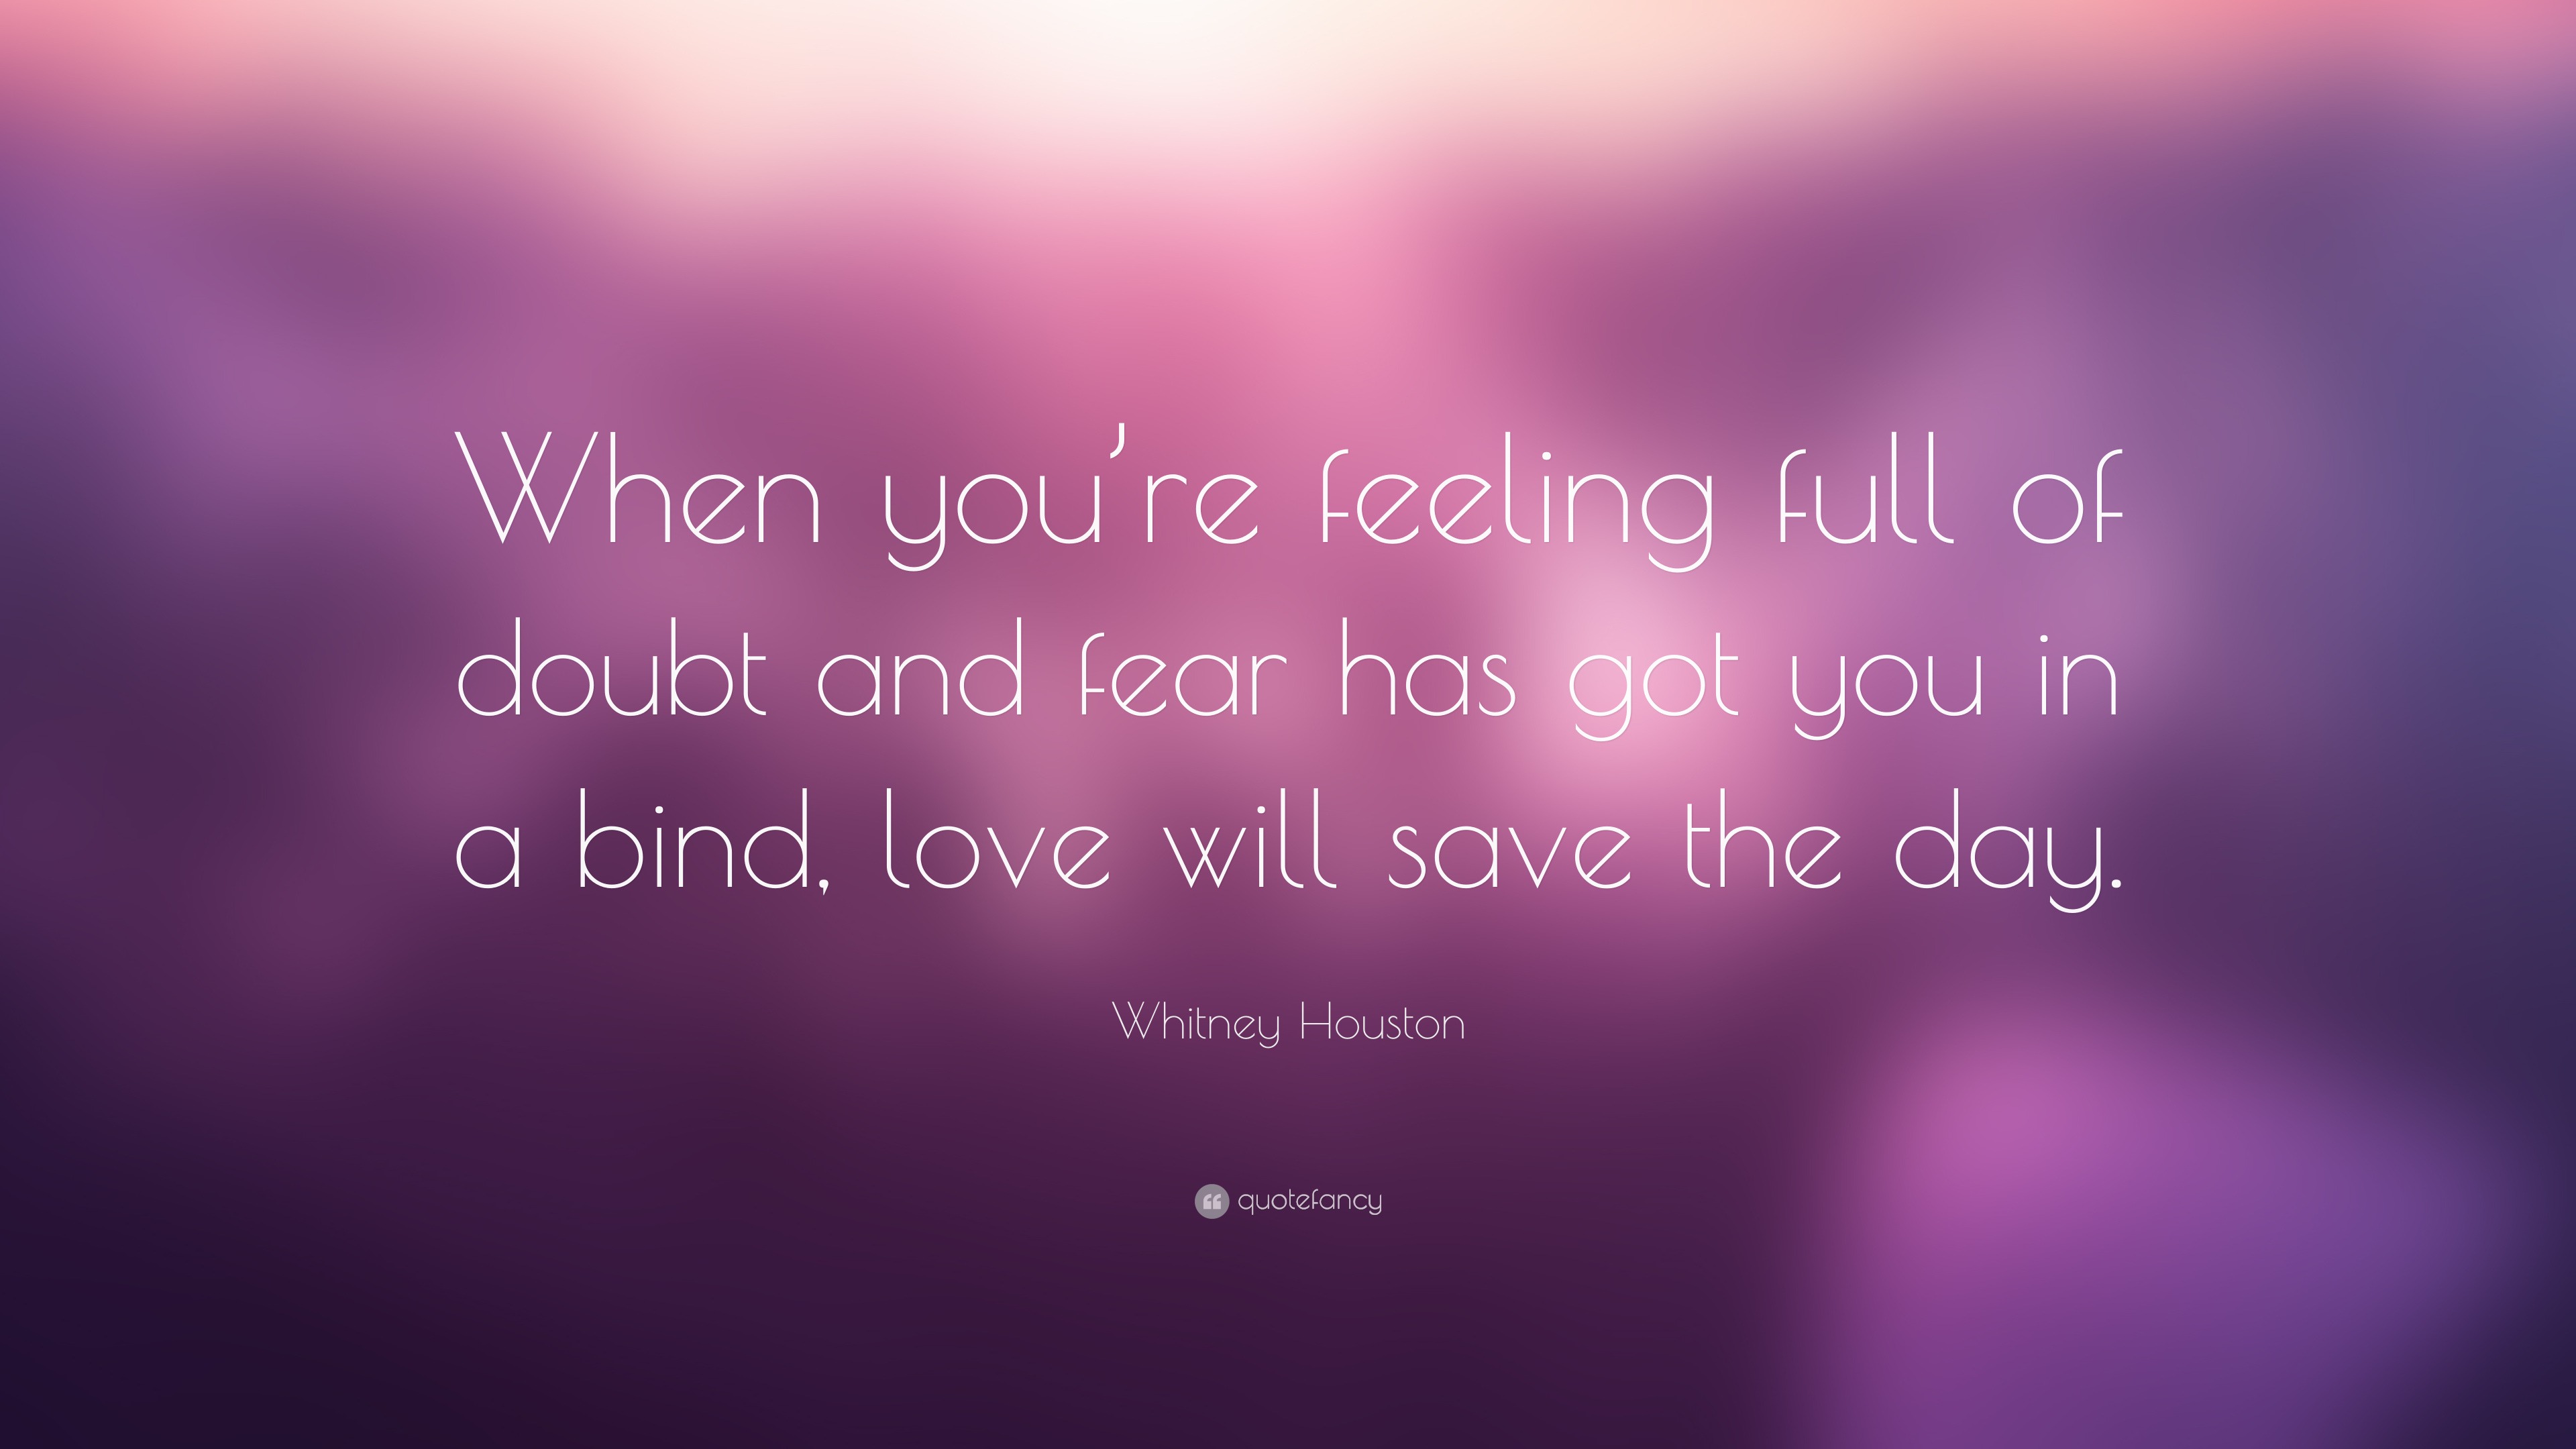 Whitney Houston Quote: “When you’re feeling full of doubt and fear has ...